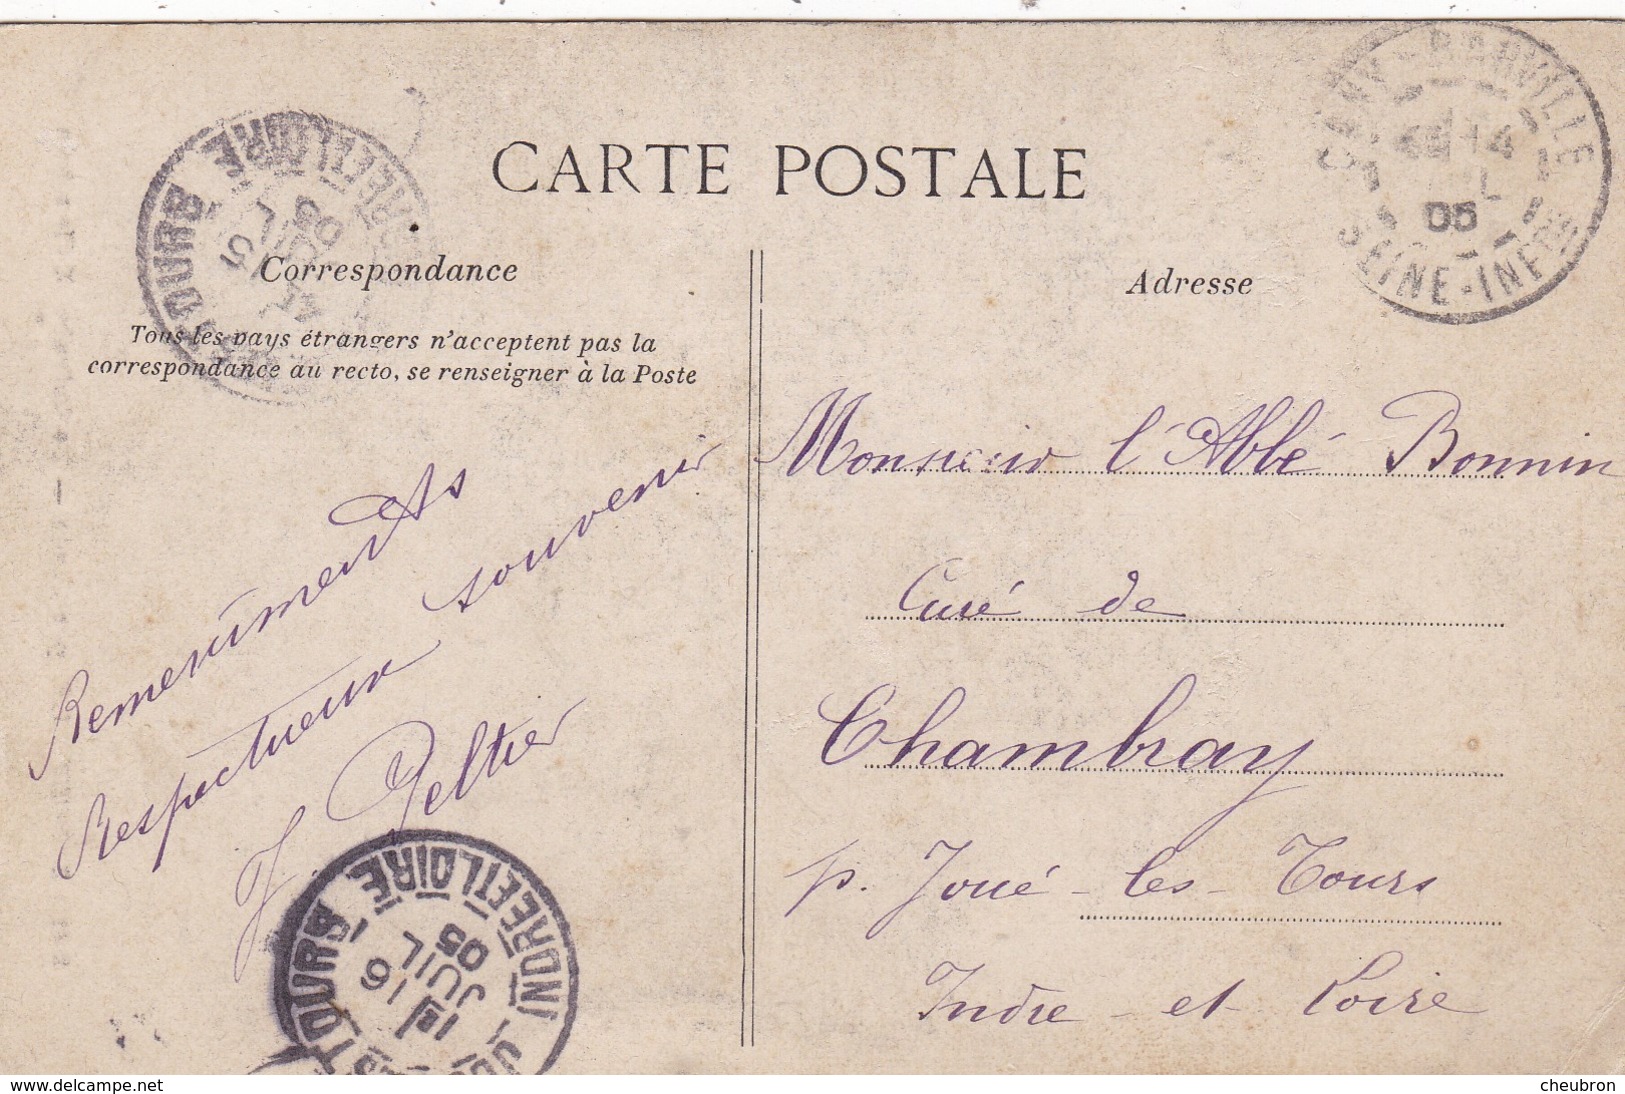 76. CANY SASSEVILLE. CPA. LE CALVAIRE.  ANNEE 1905 - Cany Barville